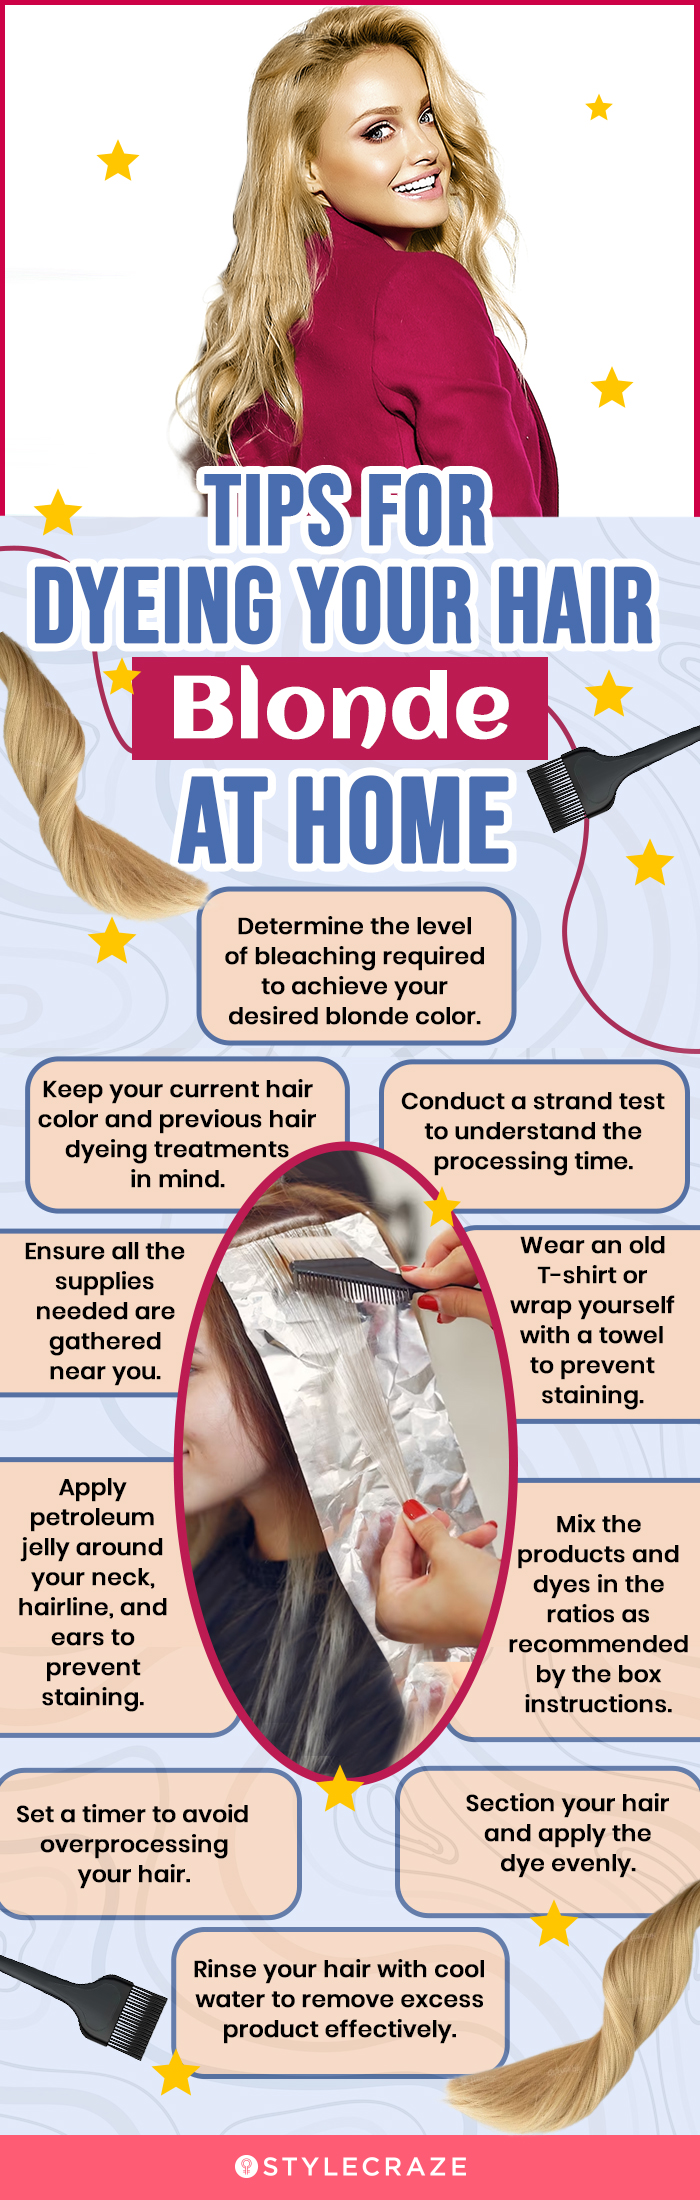 Tips For Dyeing Your Hair Blonde At Home (infographic)